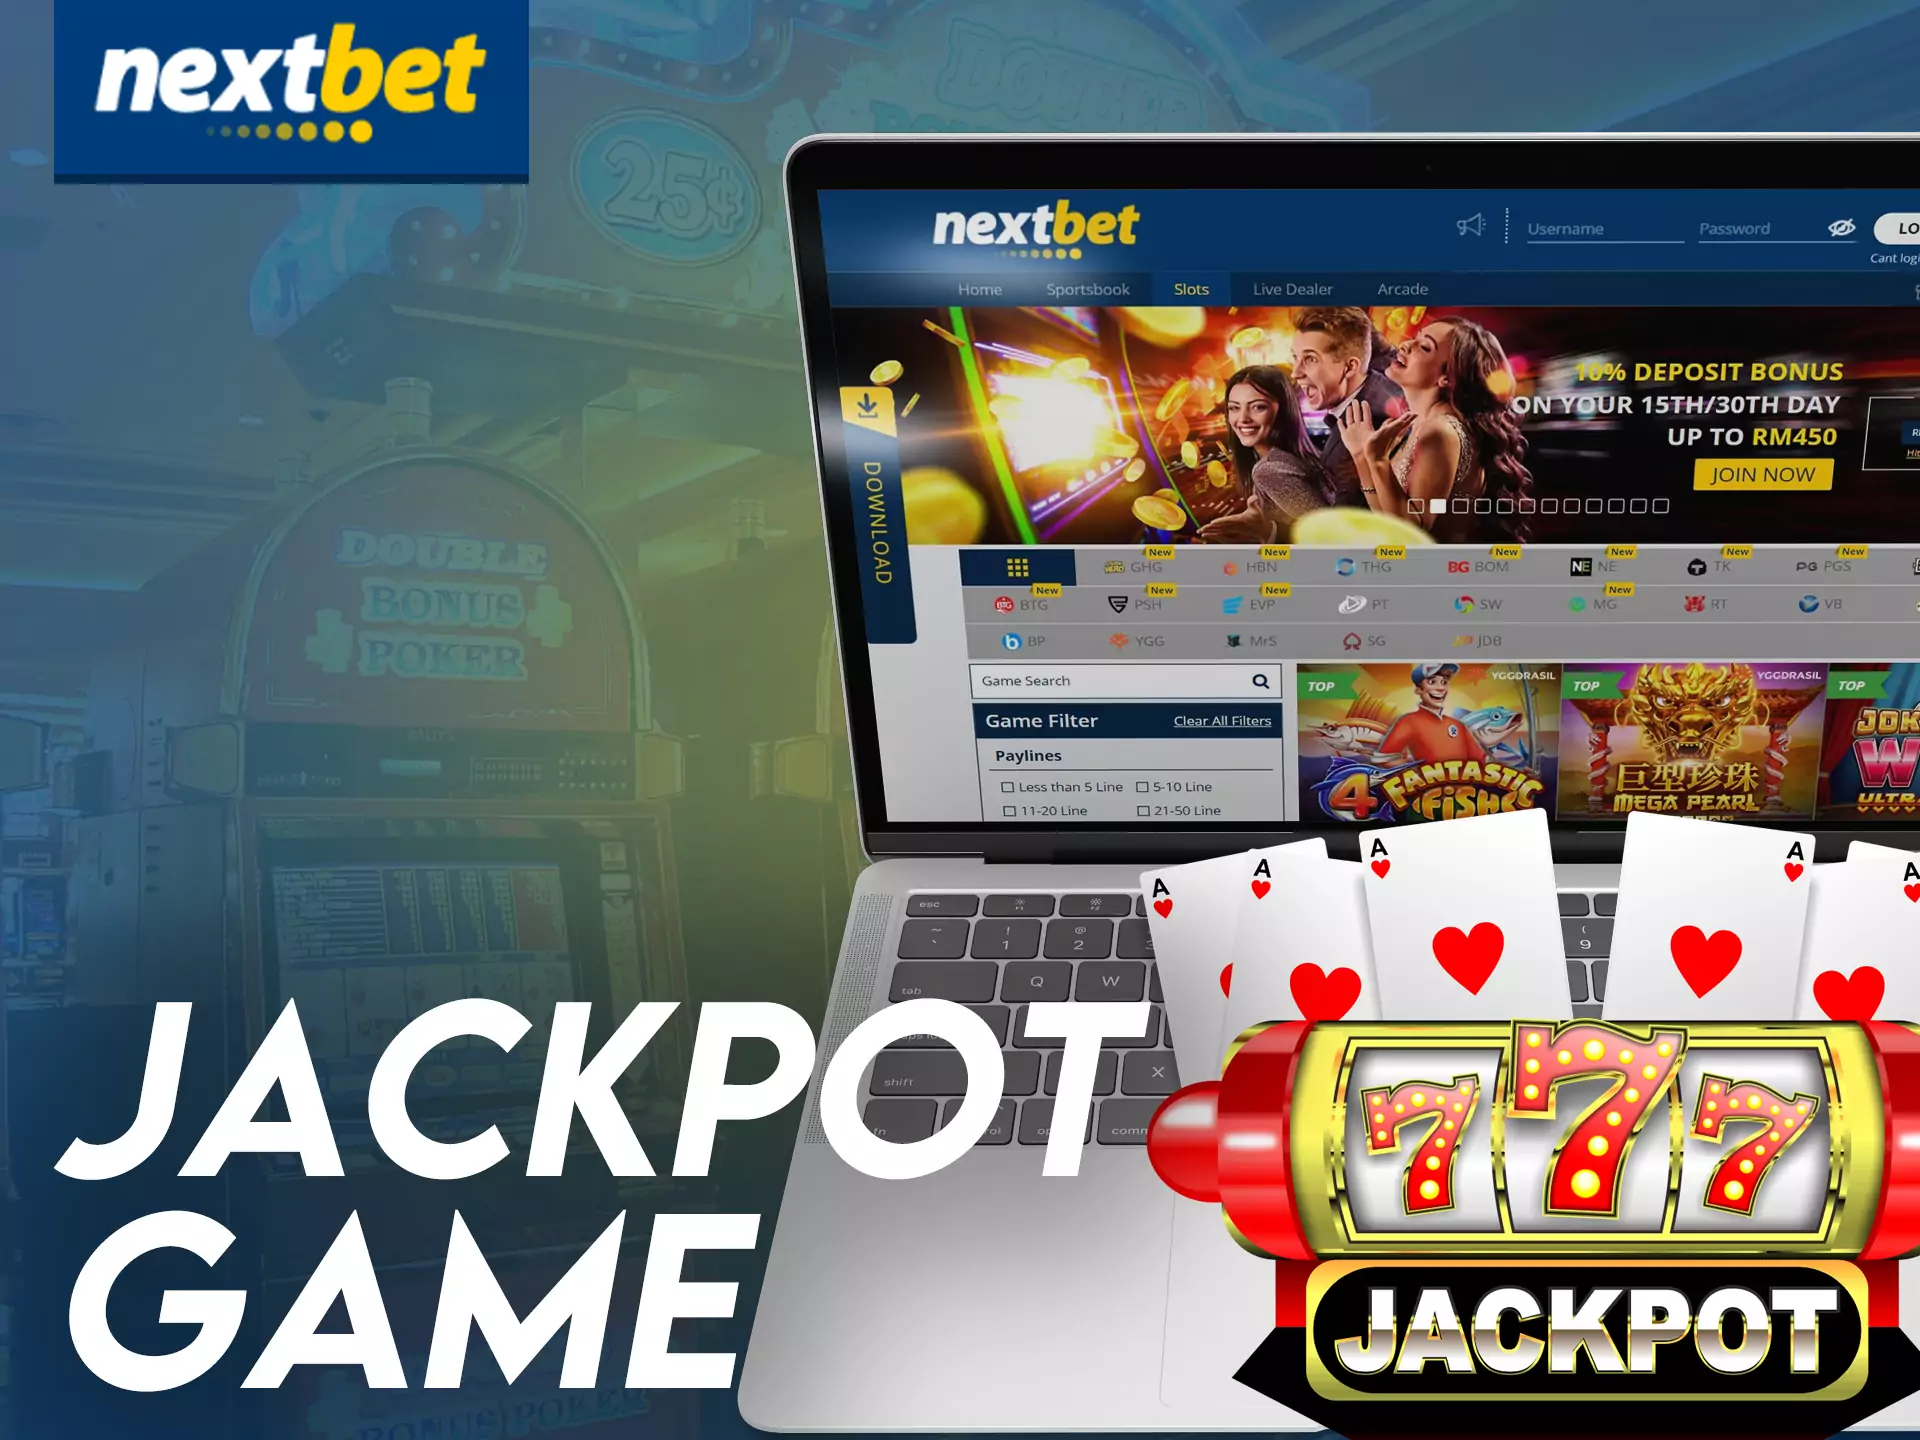 Try your luck in jackpot games at Nextbet Casino.